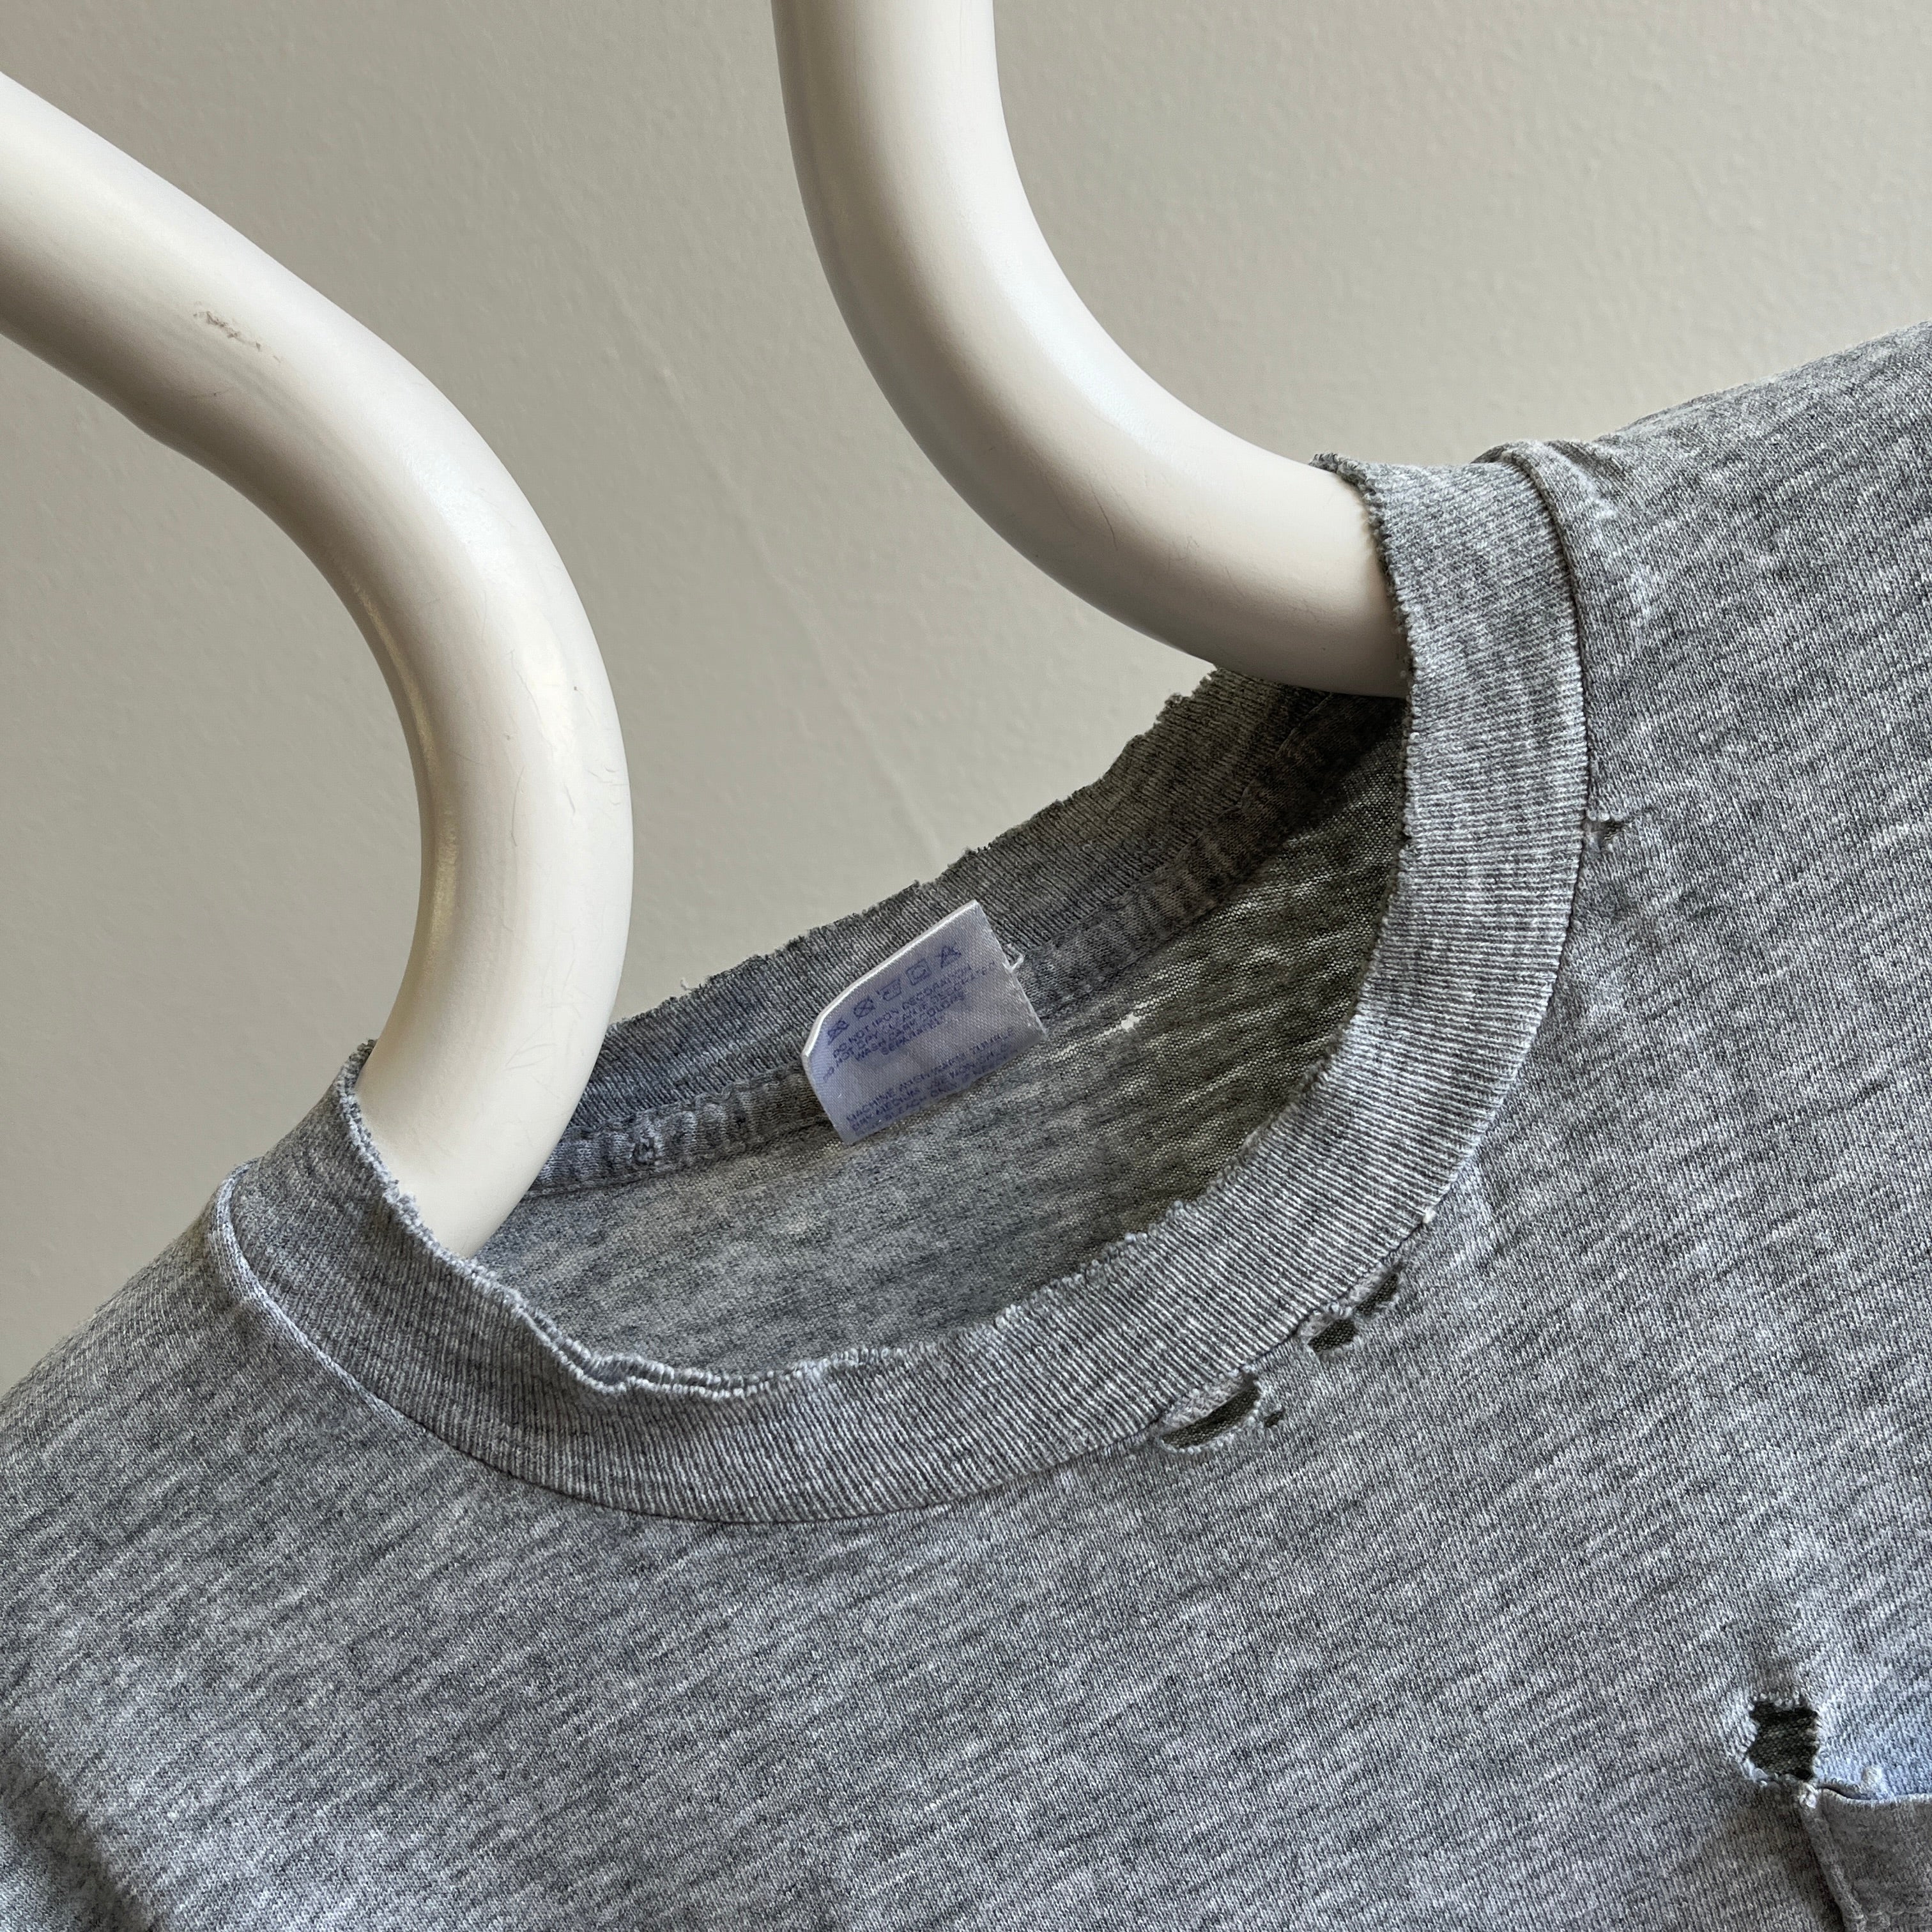 1980s Beat Up Thin and Worn Blank Gray Pocket T-Shirt by BVD